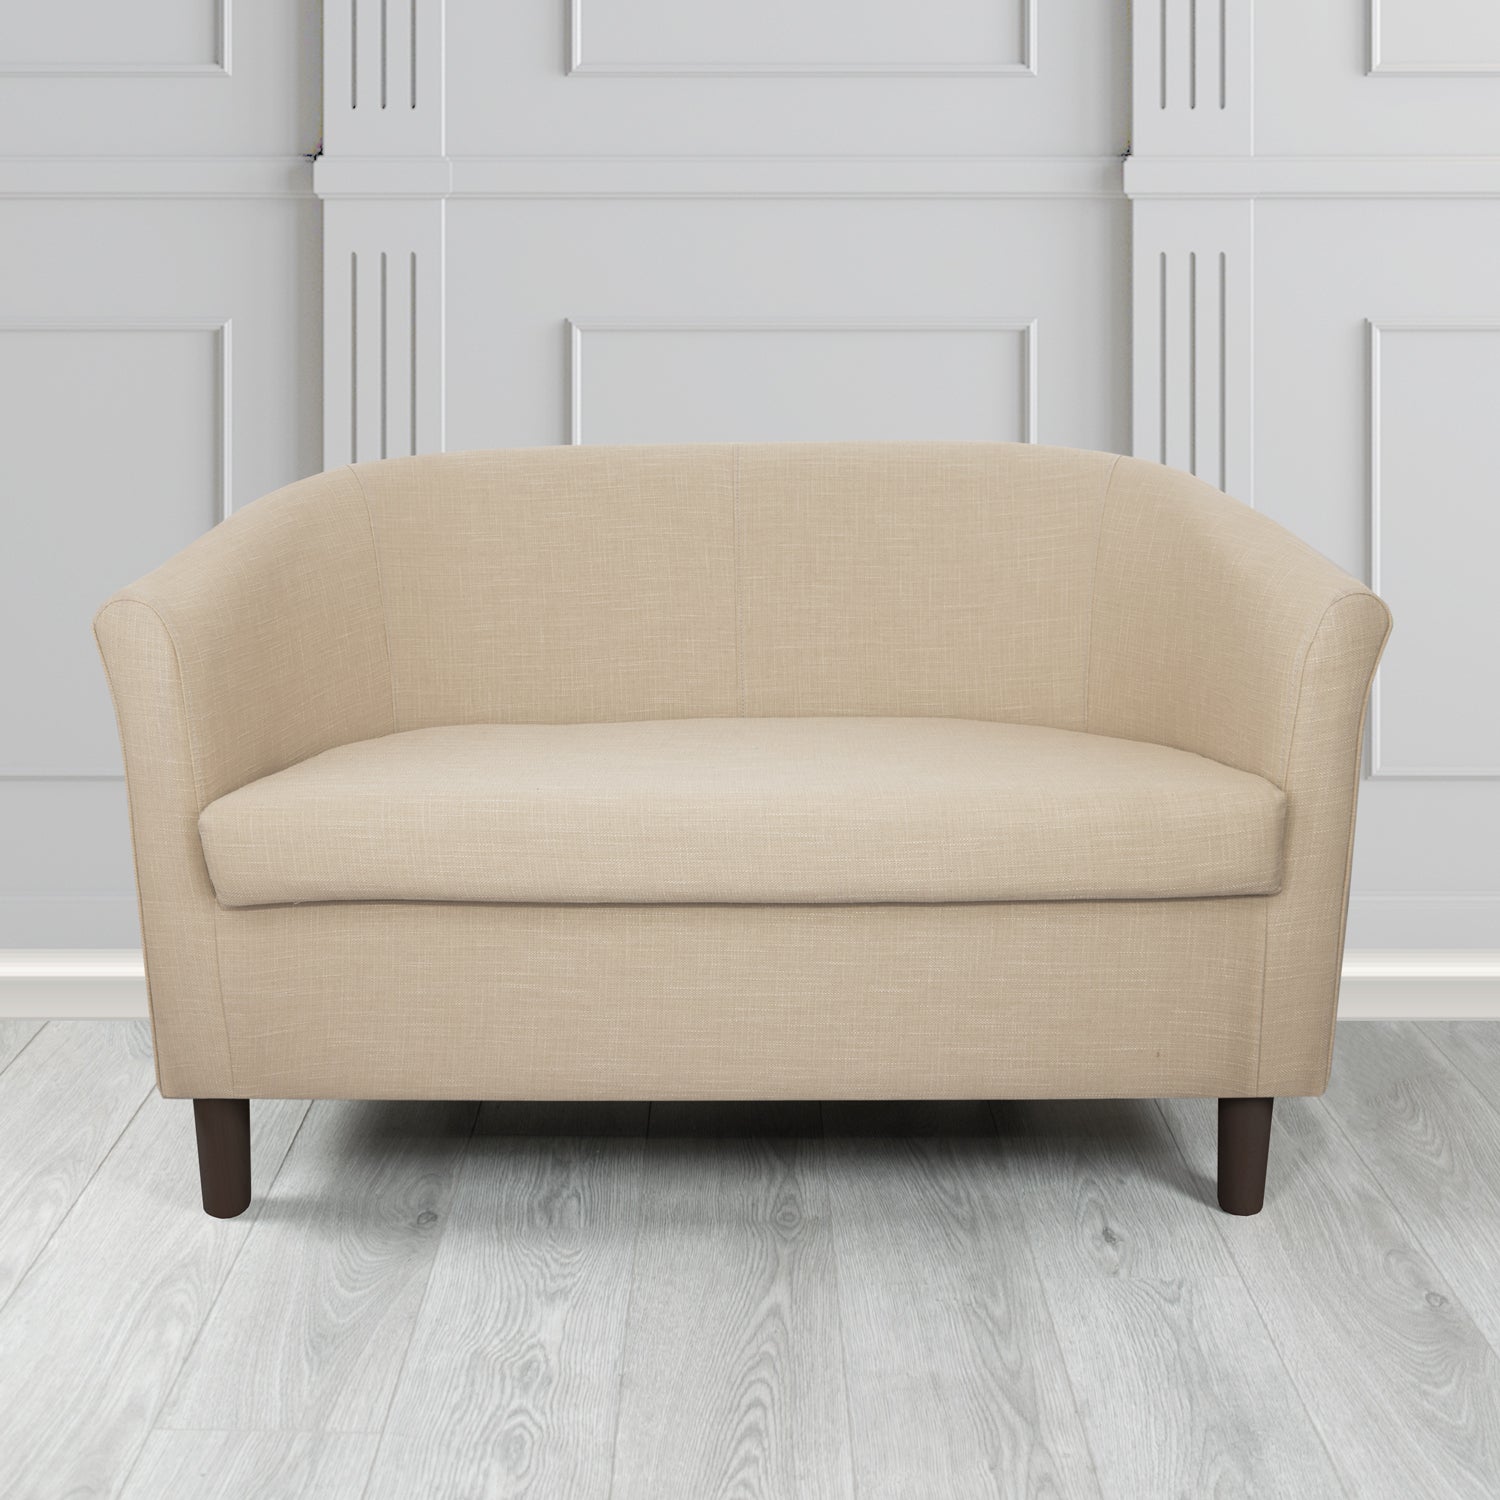 Tuscany 2 Seater Tub Sofa in Emporio Putty Linen Crib 5 Fabric - The Tub Chair Shop